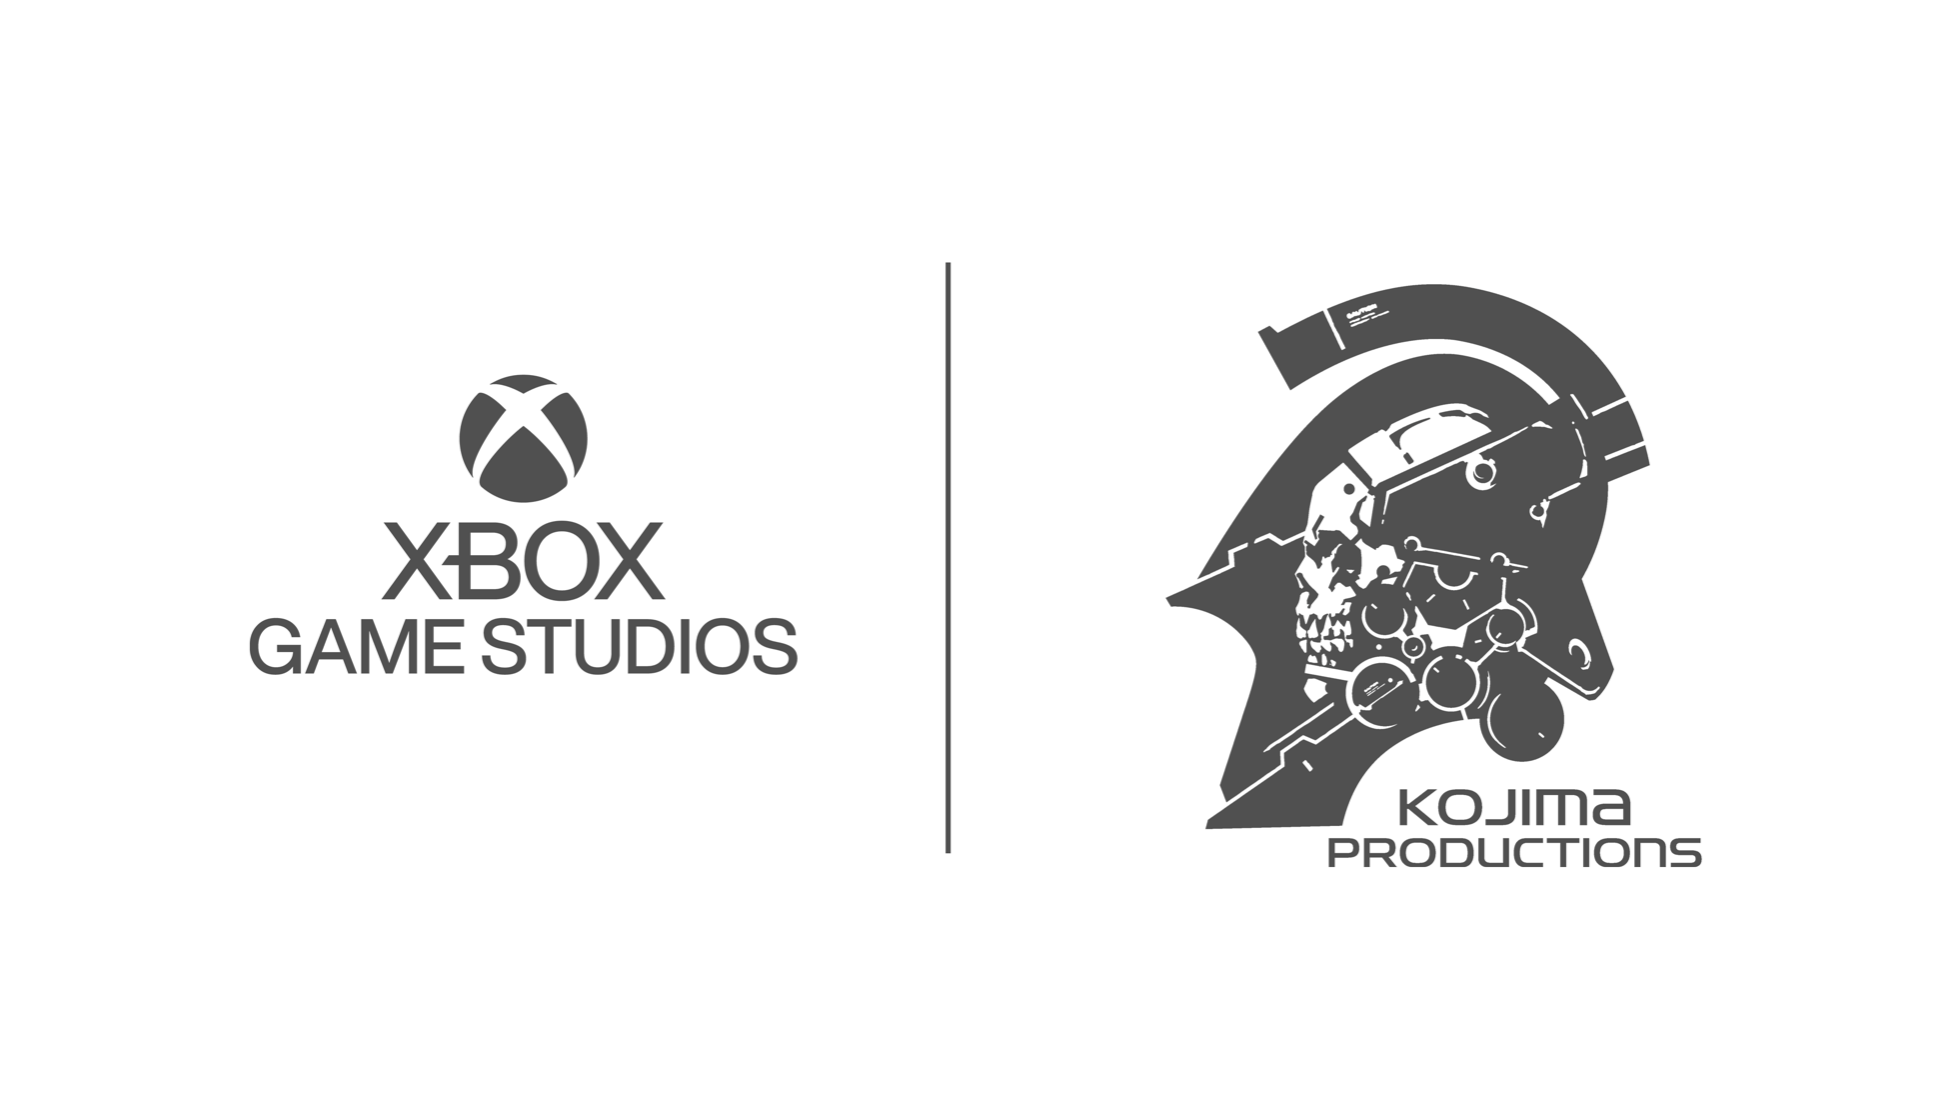 Image for Xbox Game Studios announce partnership with Kojima Productions on new game that will 'leverage the cloud'